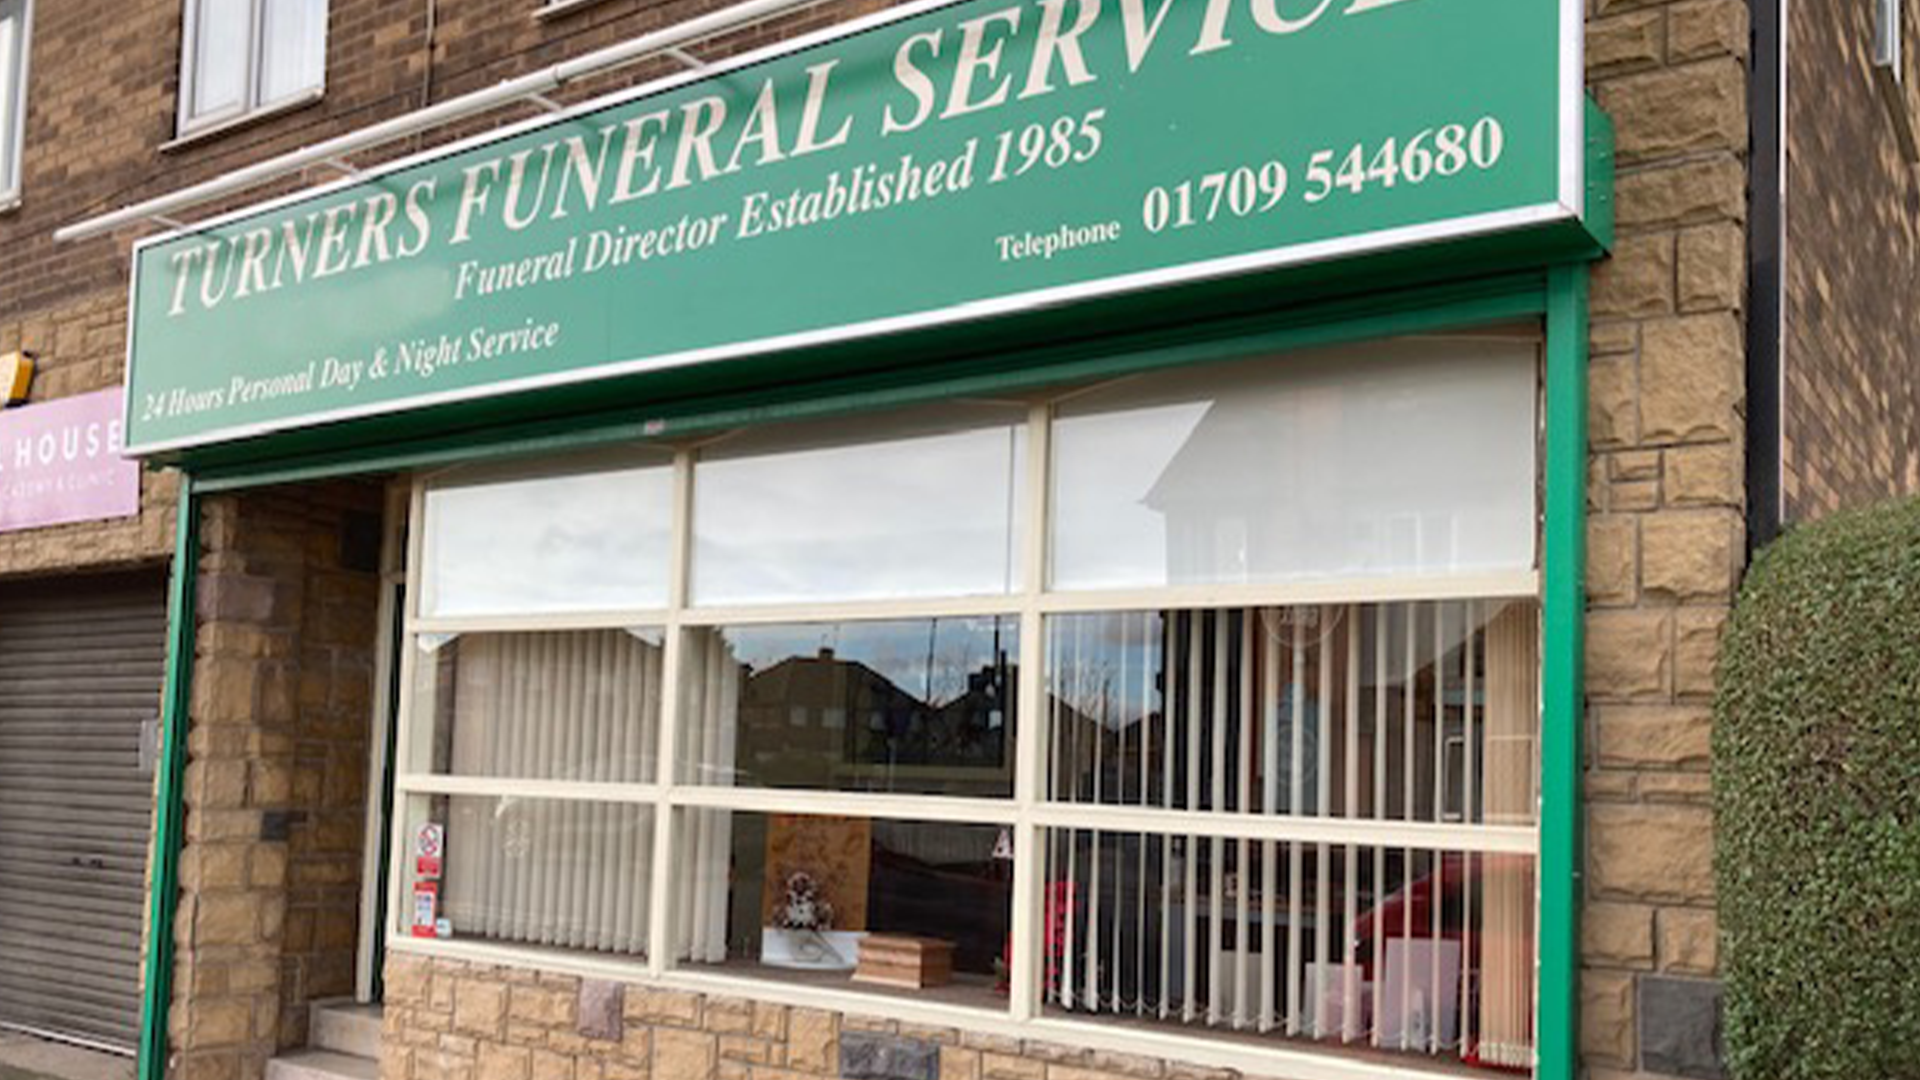 Images Turners Funeral Service and Memorial Masonry Specialist